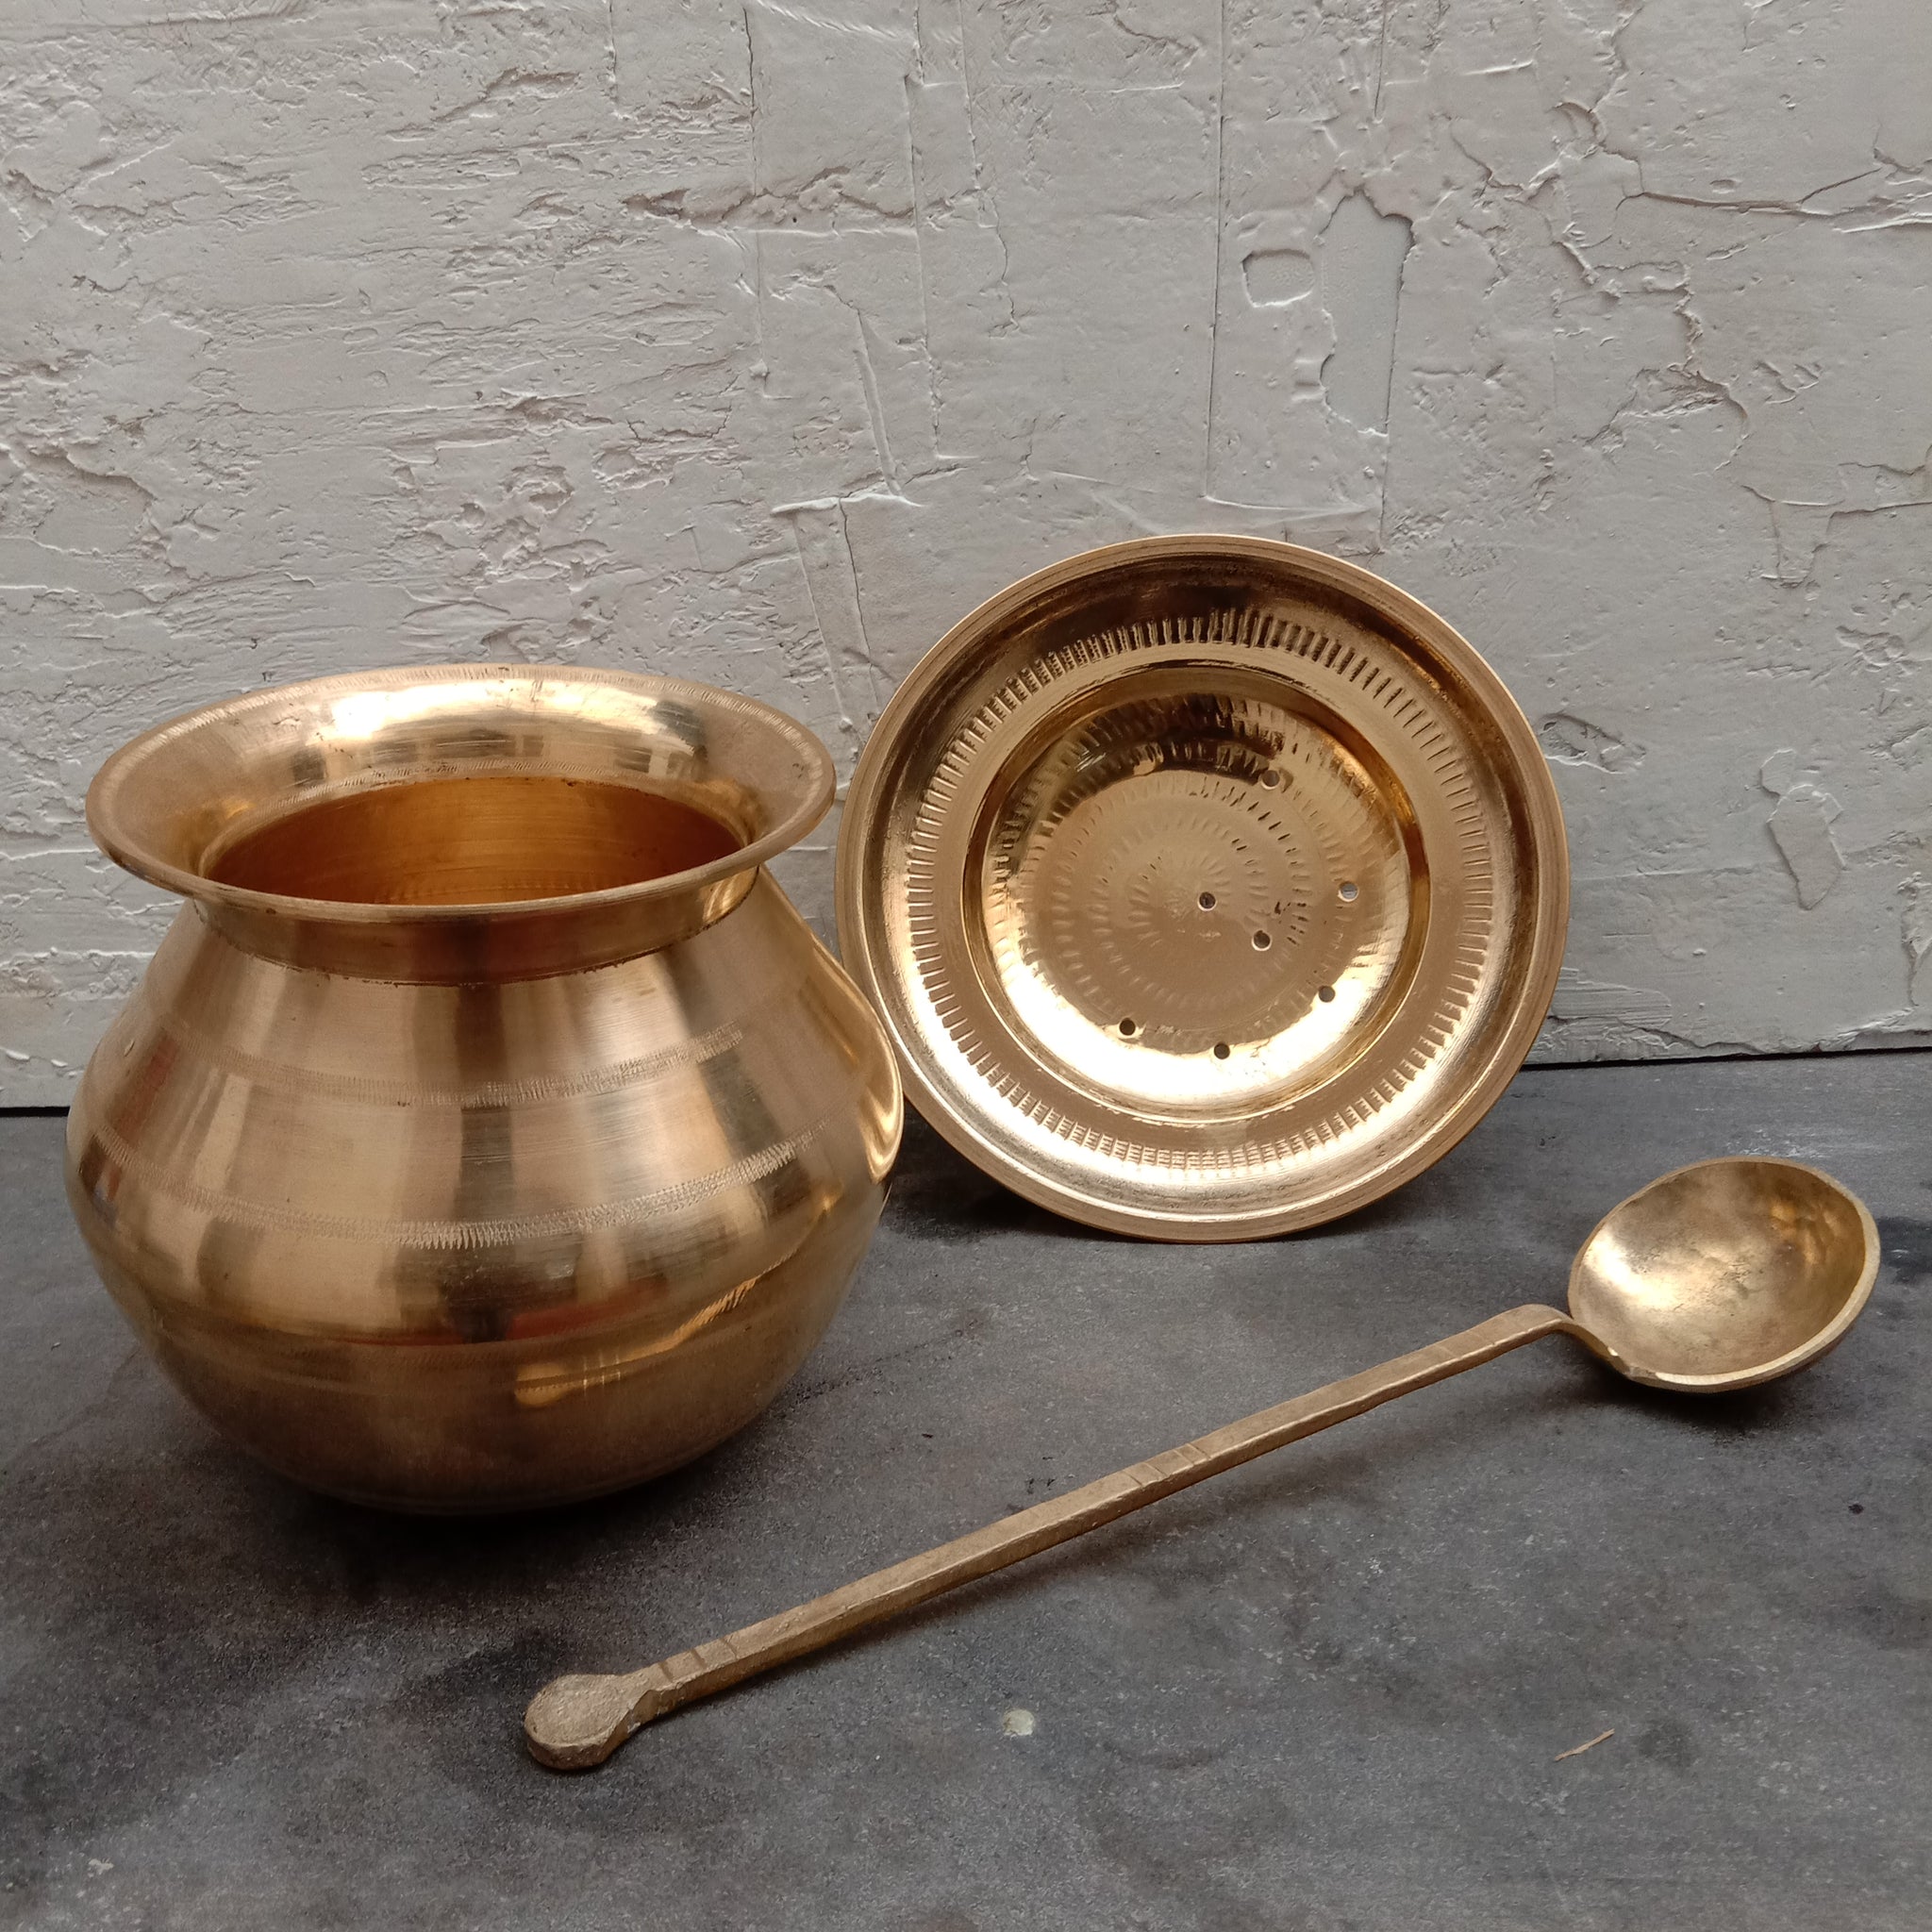 Antiquing of Brass, Copper, and Bronze